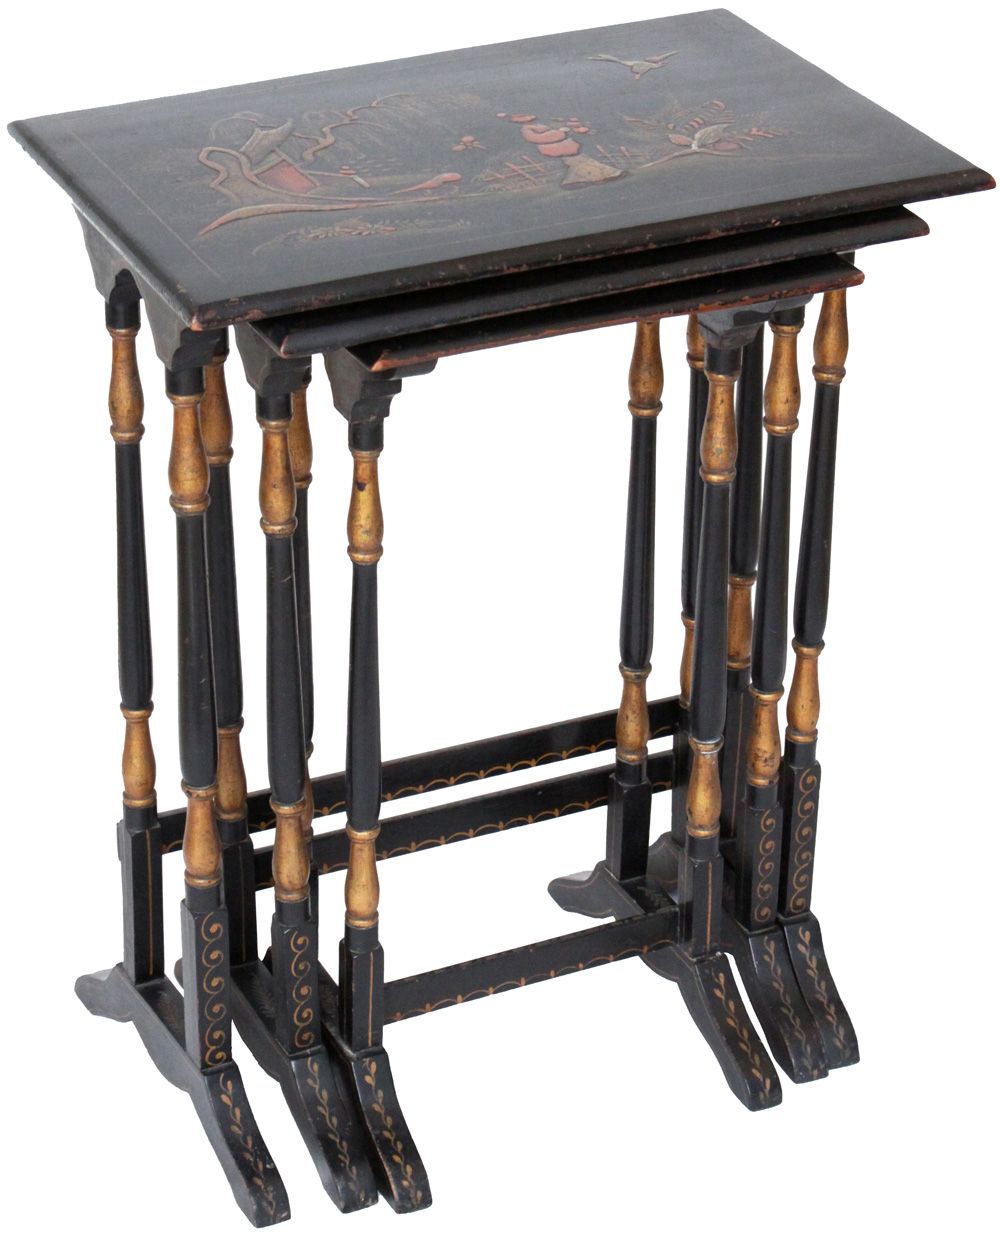 Antique English Nesting Tables with Japanned Lacquer Paintings - שולחנות מקוננים אנגלים עתיקים - Back To List of Antique Furniture